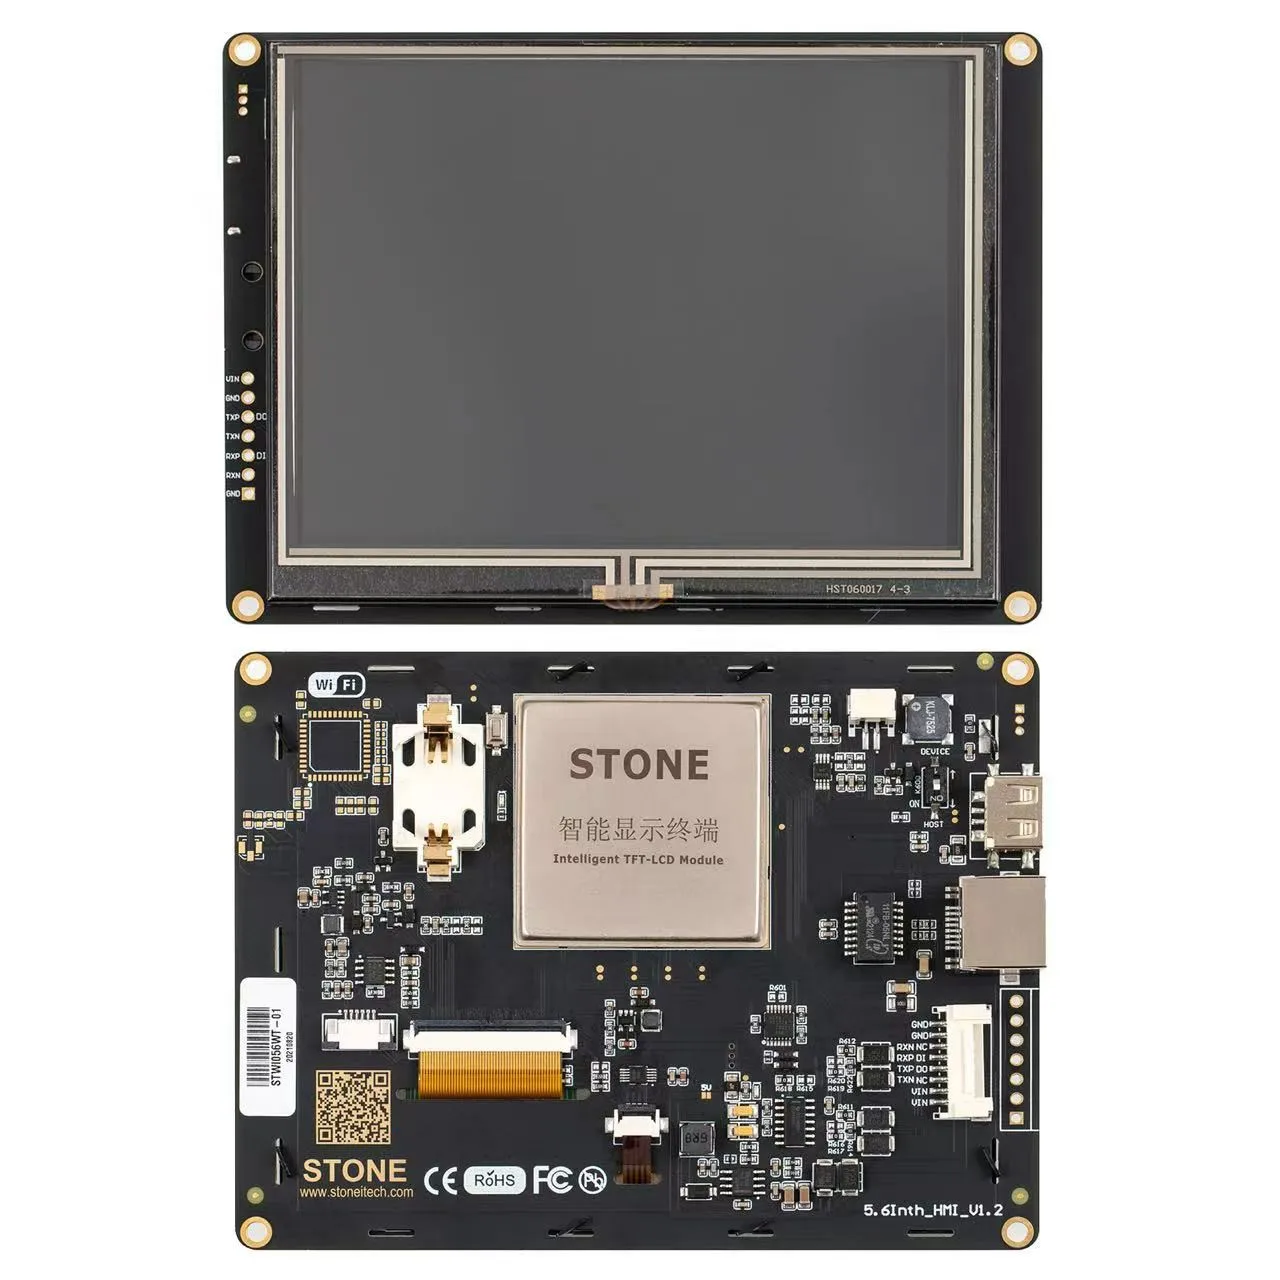 STONE 5.6 Inch HMI TFT LCD Display Module with Monitor touch screen Touch Screen